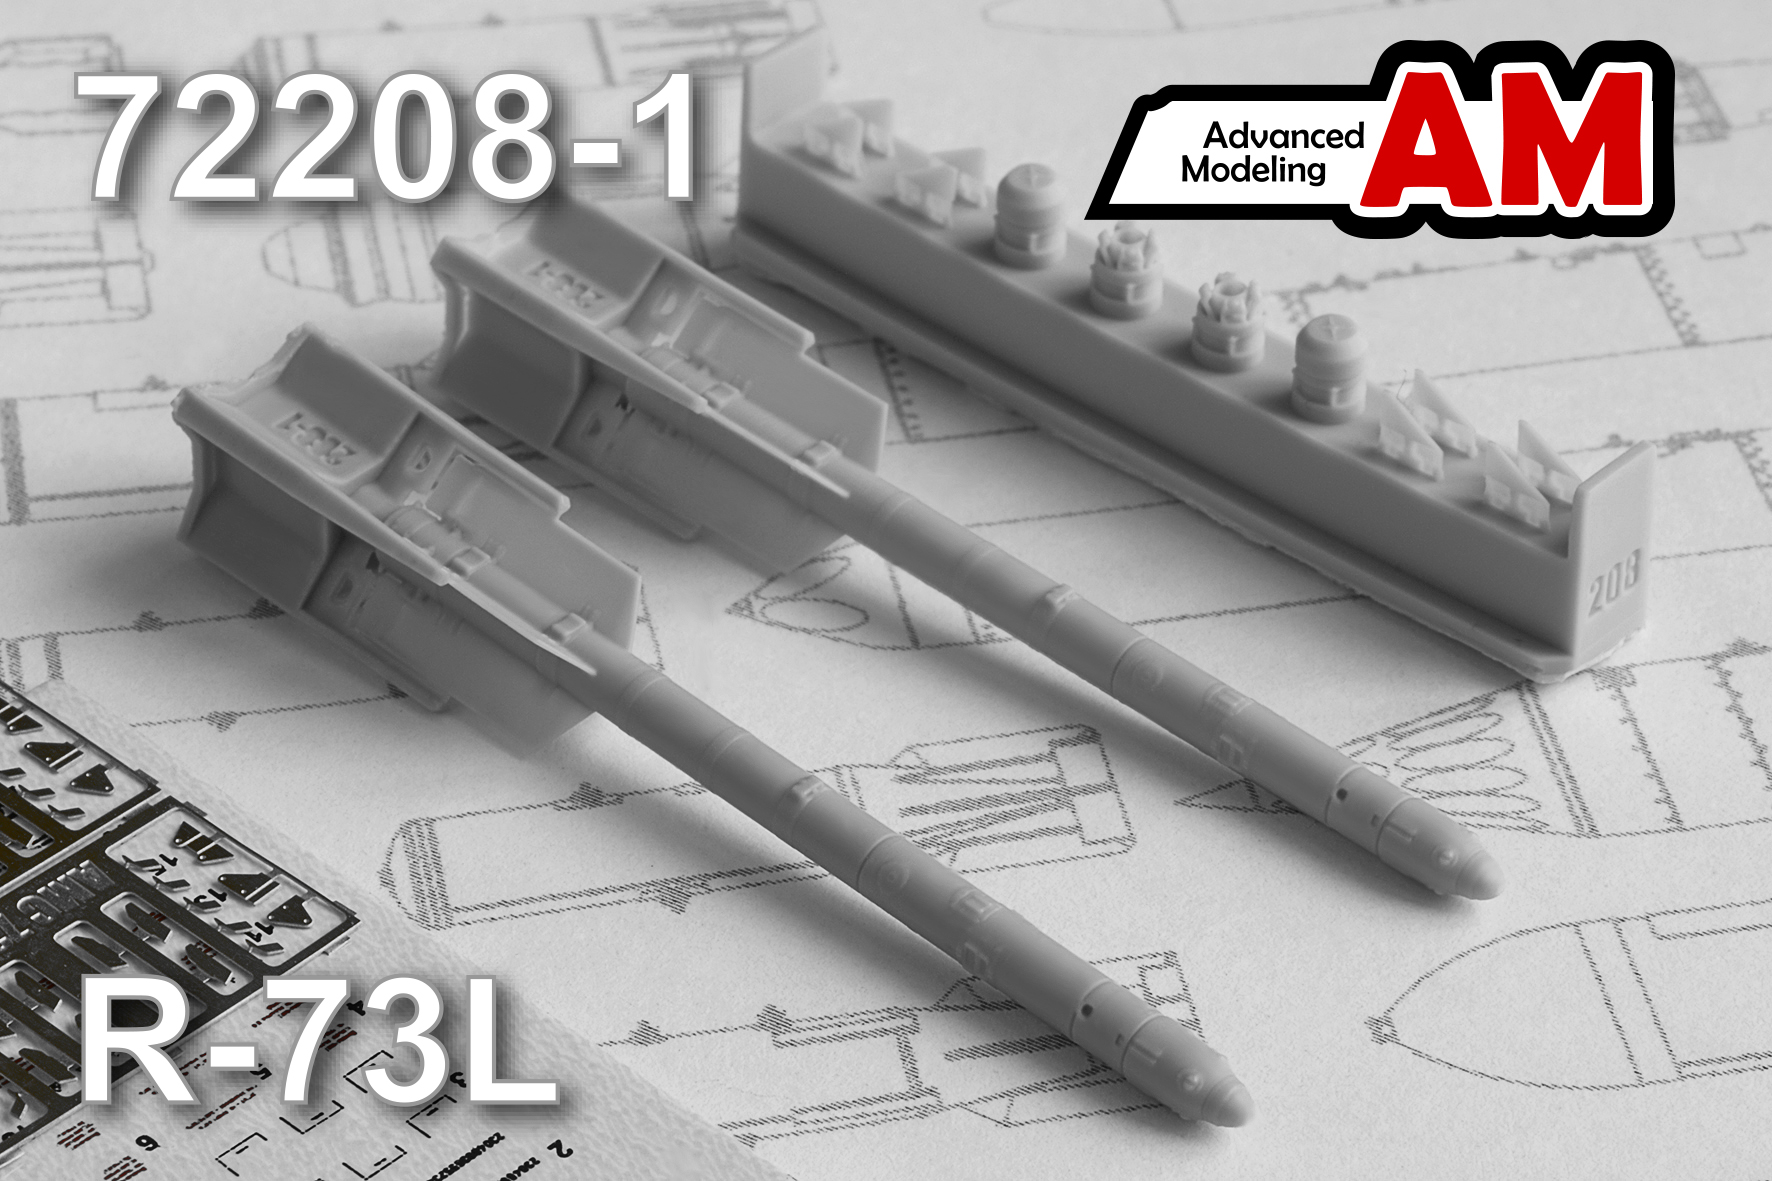 Additions (3D resin printing) 1/72 Aircraft guided missile R-73L (Advanced Modeling) 